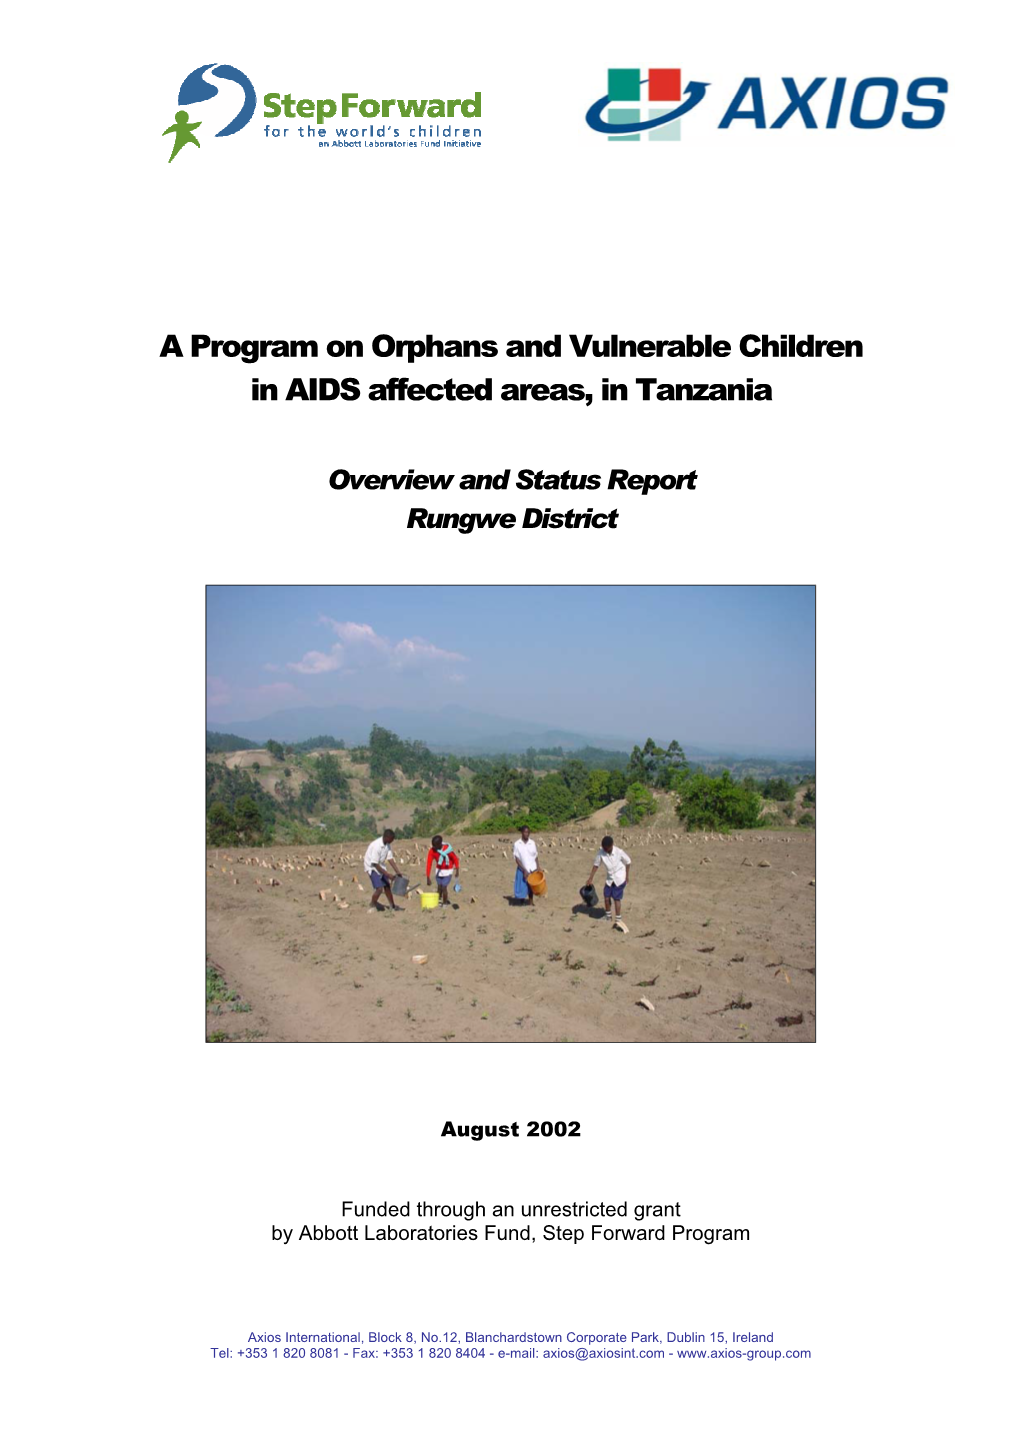 A Program on Orphans and Vulnerable Children in AIDS Affected Areas, in Tanzania